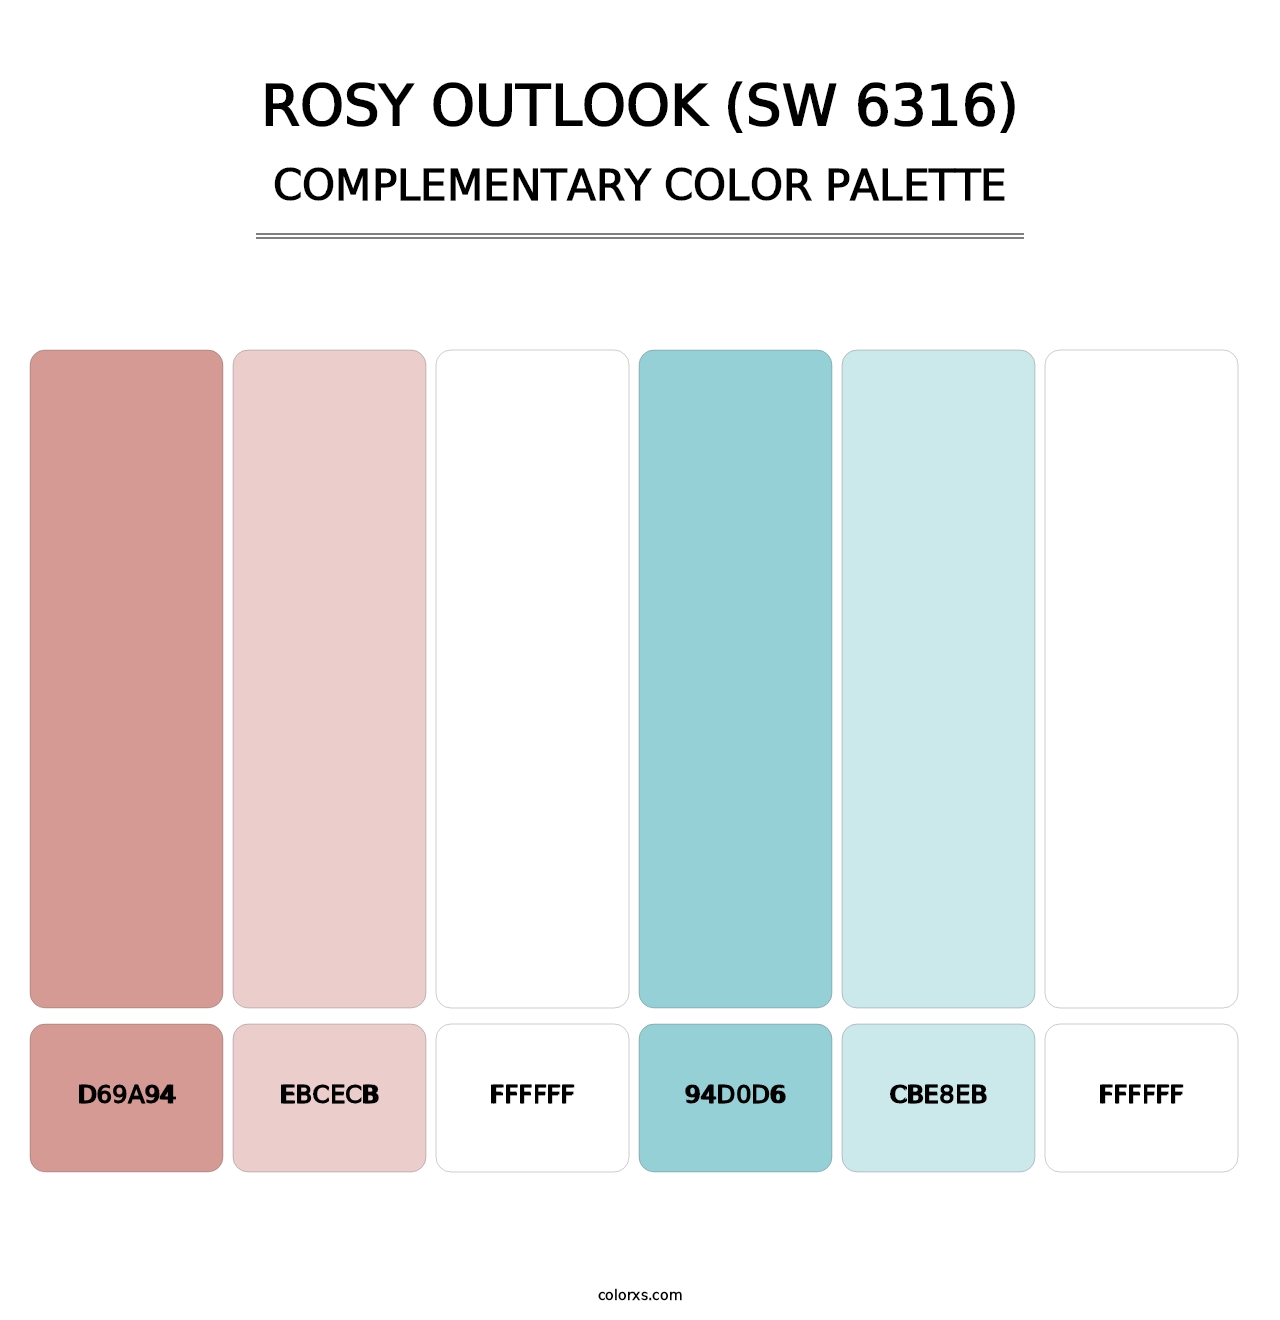 Rosy Outlook (SW 6316) - Complementary Color Palette